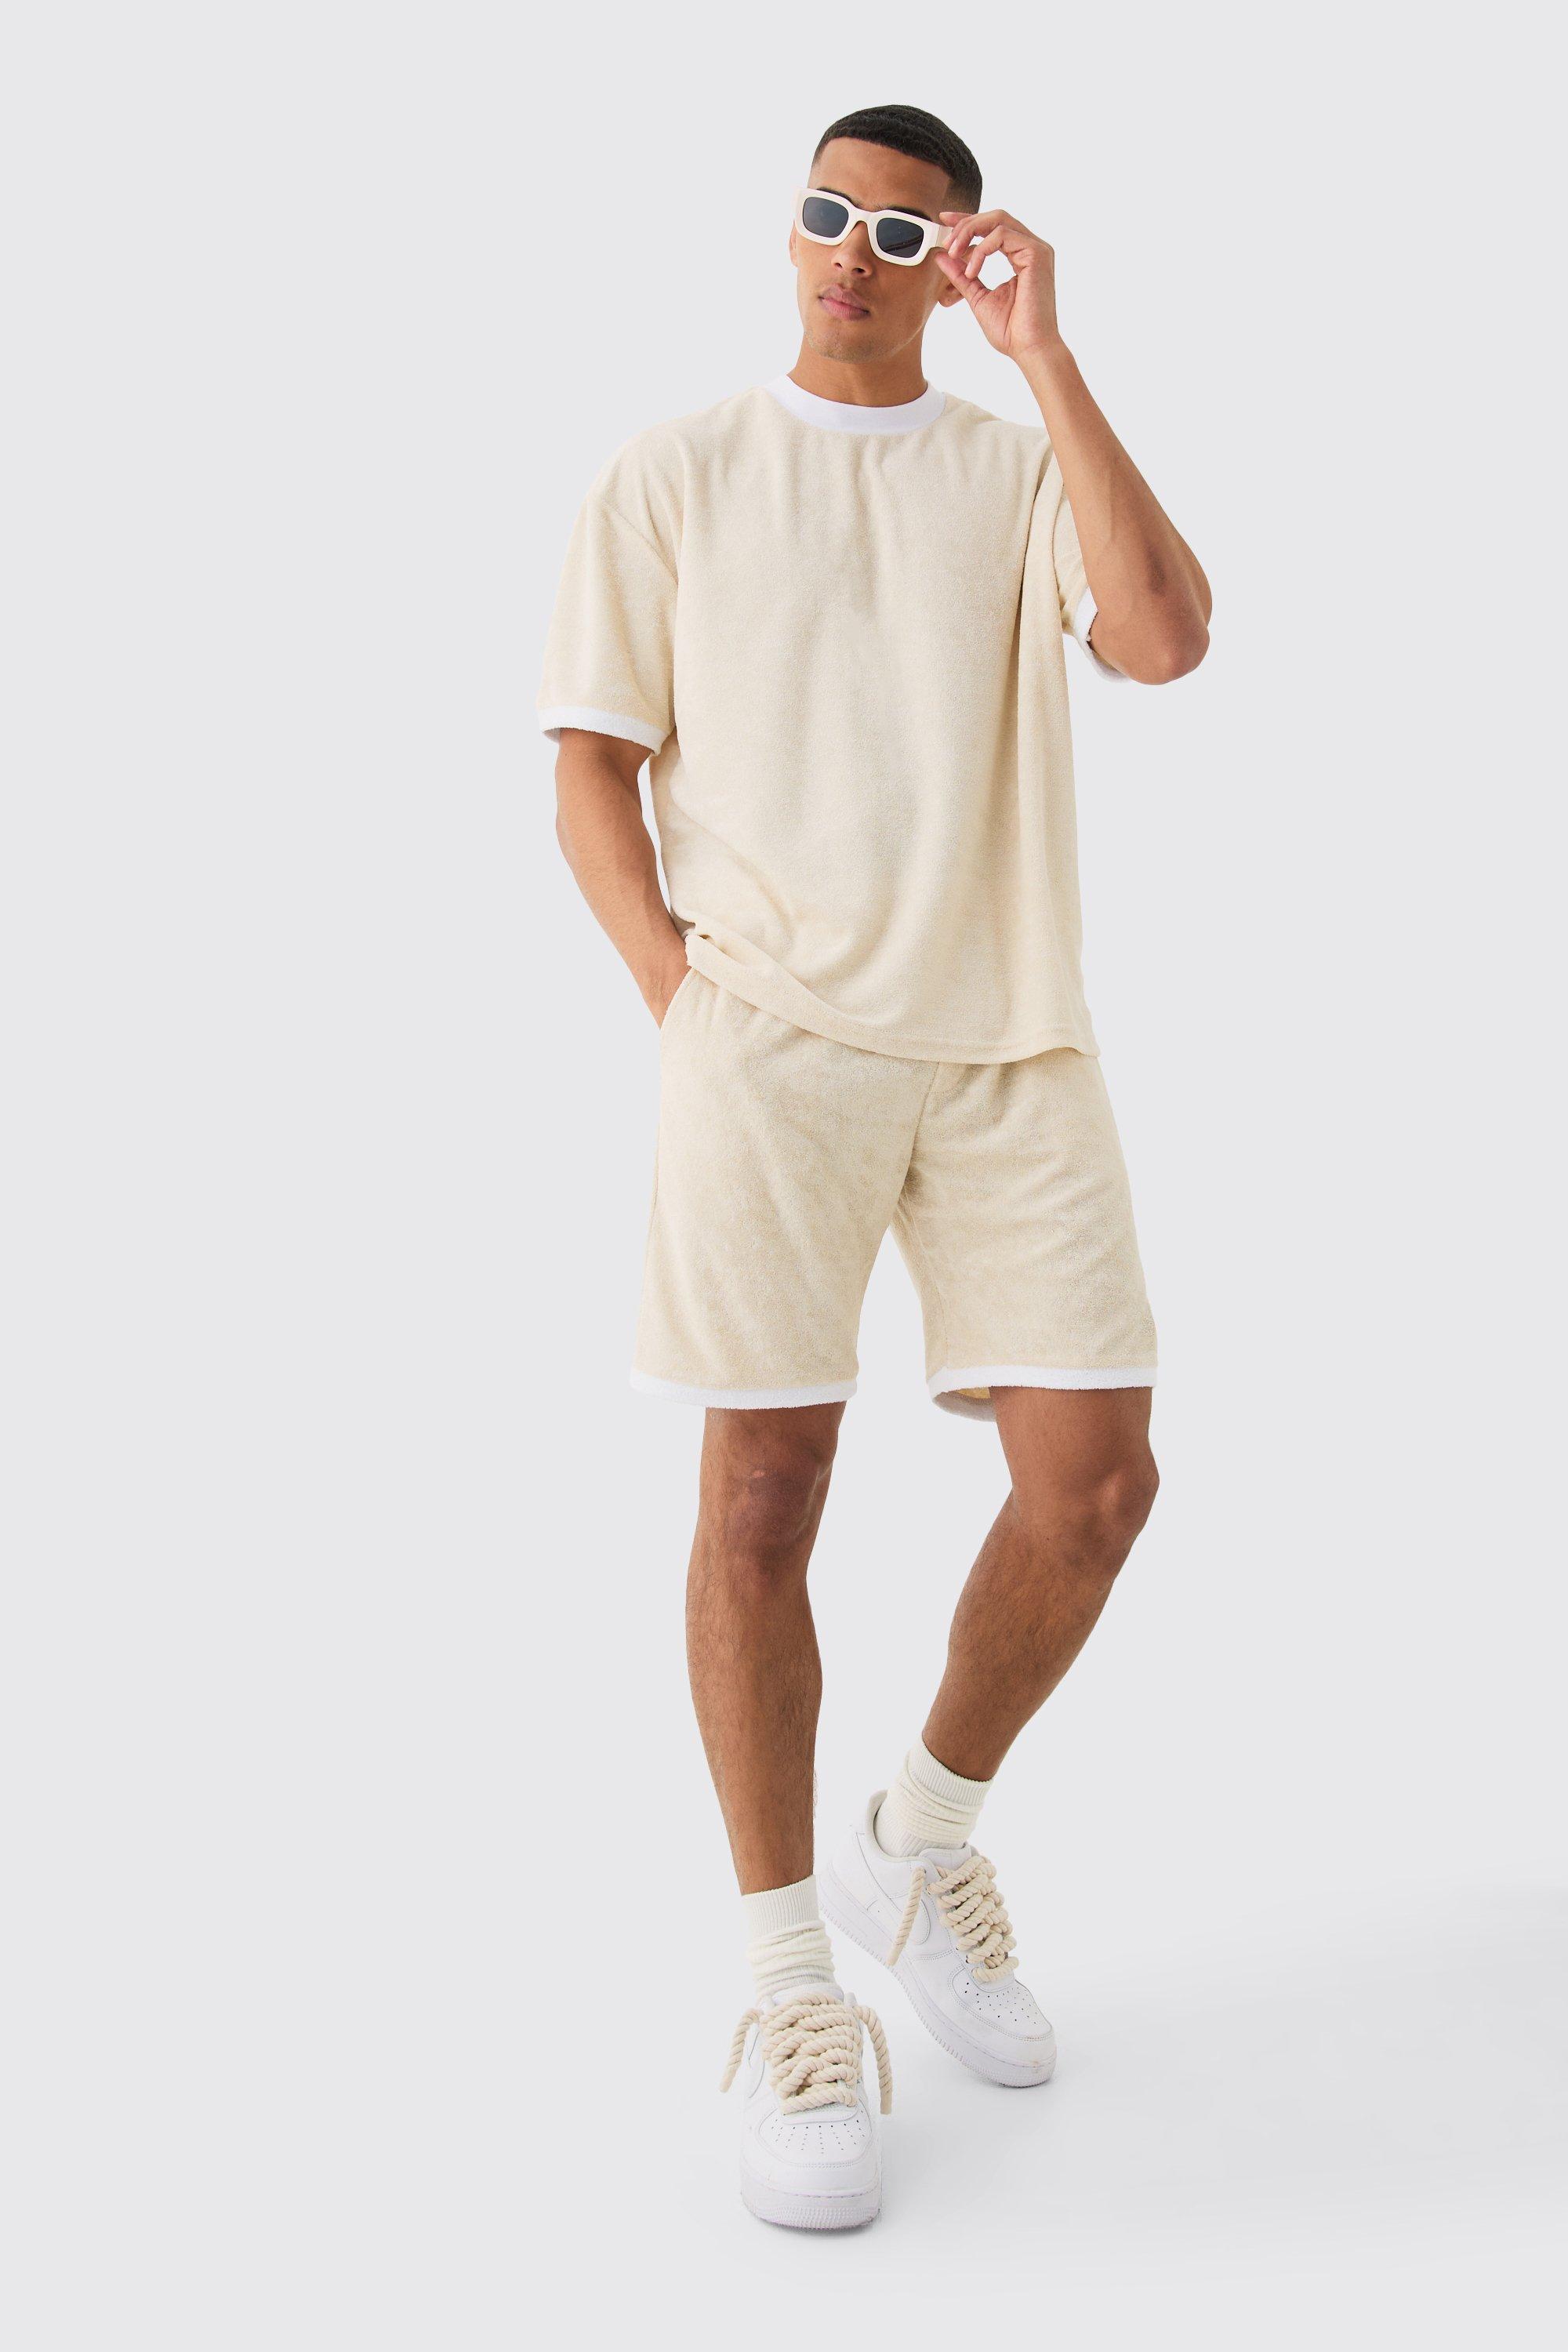 Image of Oversized Extended Neck Contrast Towelling T-shirt & Shorts, Beige